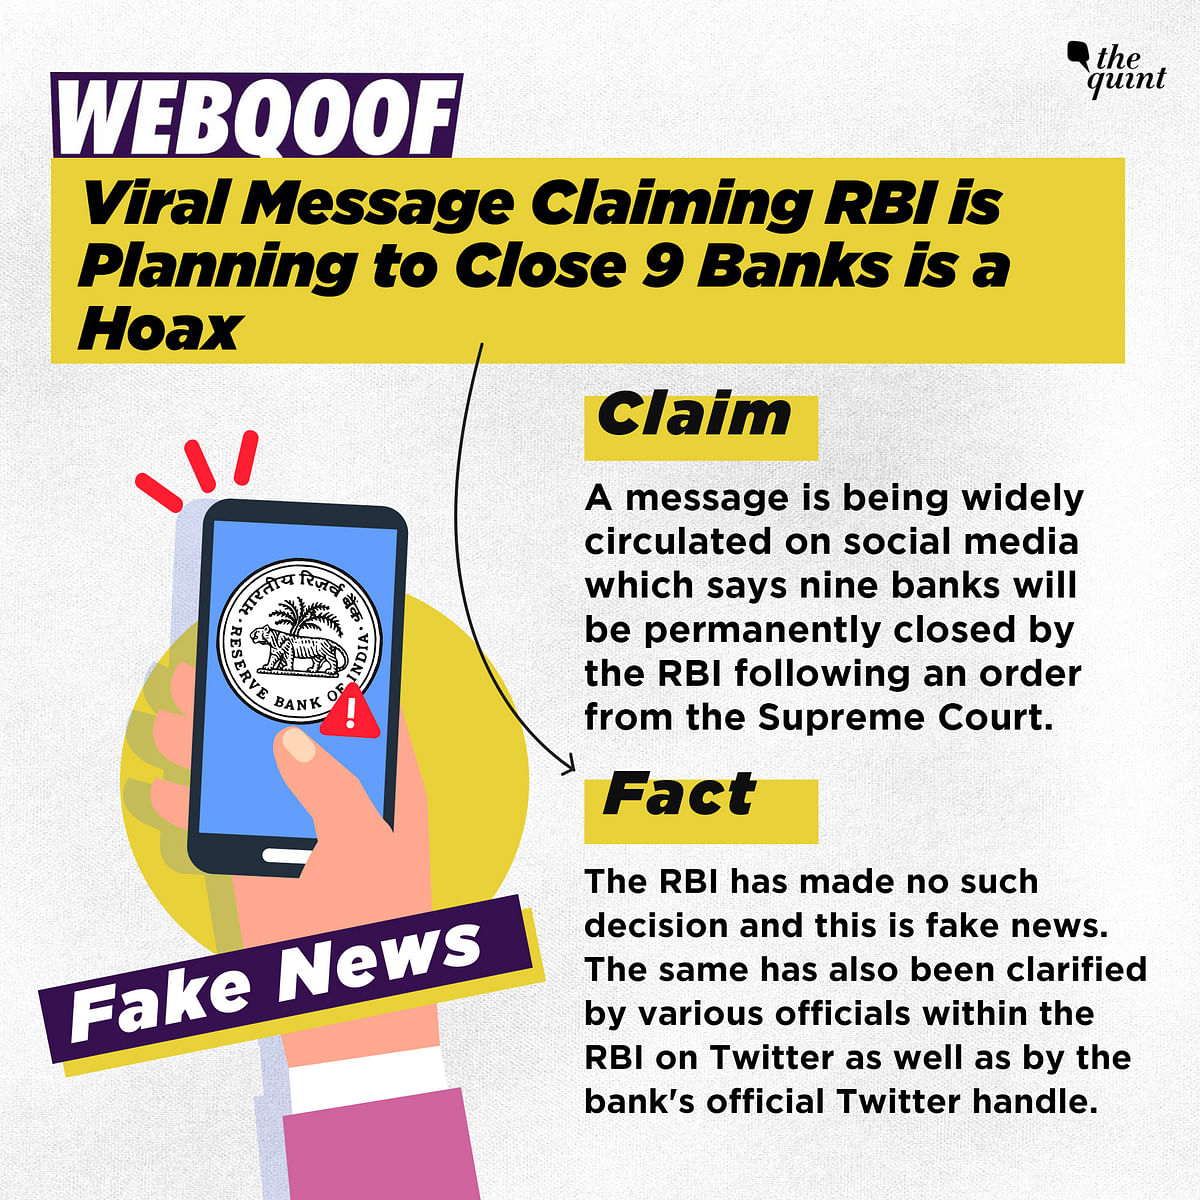 Yogesh Dayal, Chief General Manager of the RBI, has clarified on Twitter that the bank closure message is a hoax.